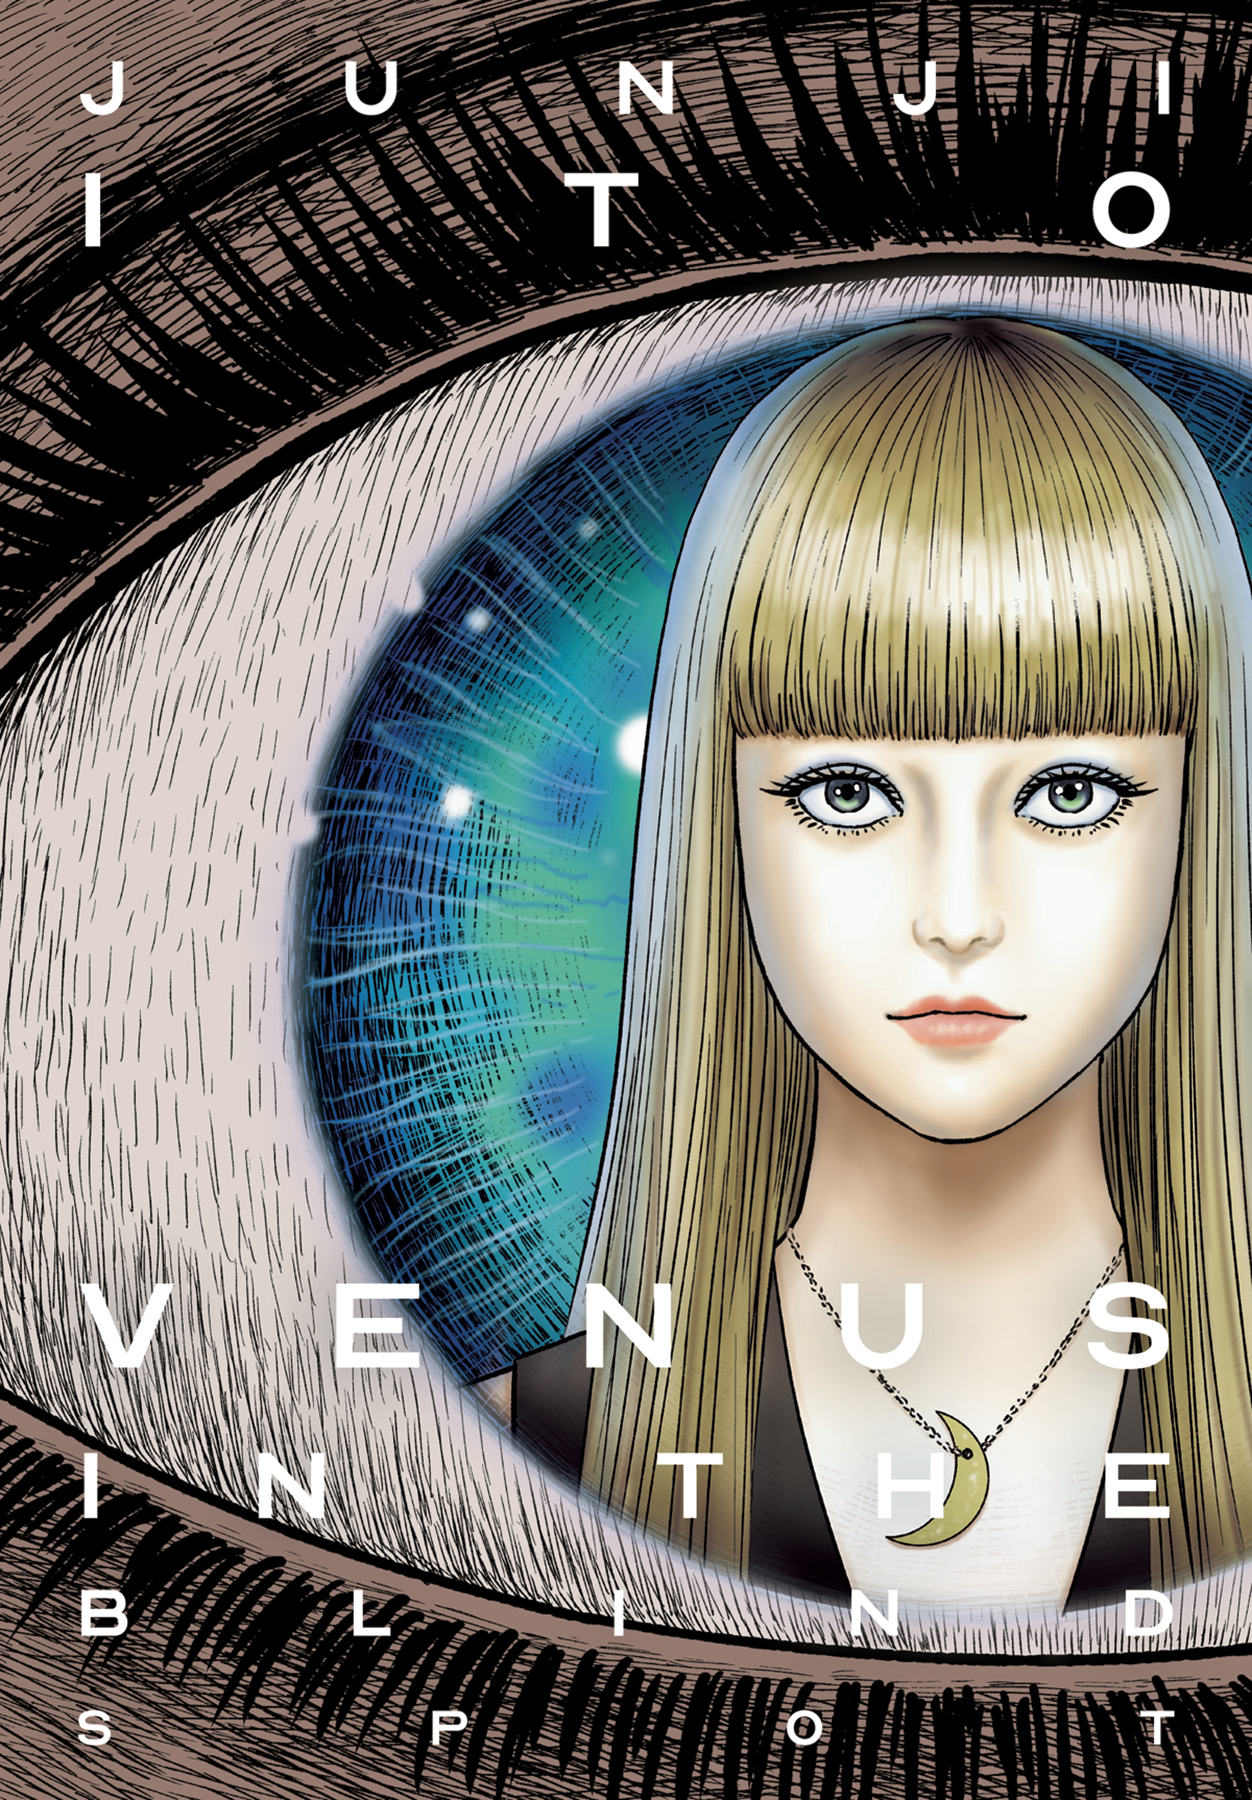 Junji Ito Story Collection Hardcover Volume 8 Venus in the Blind Spot